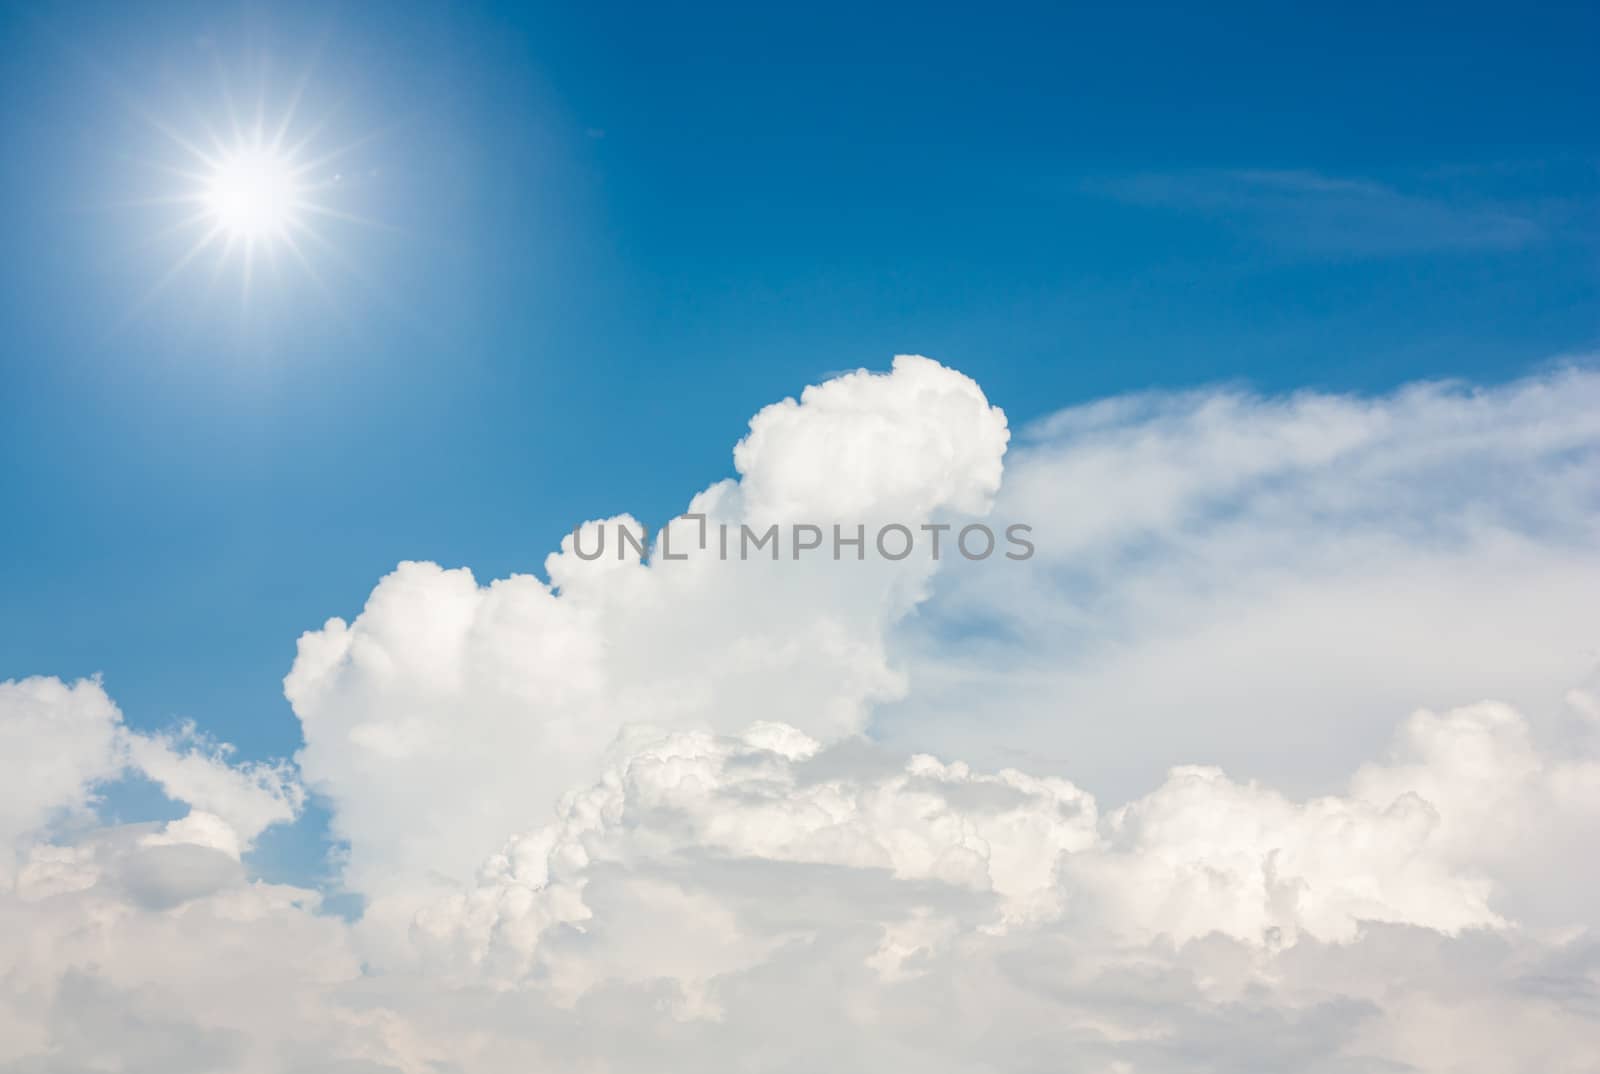 The sun and white clouds background in blue sky